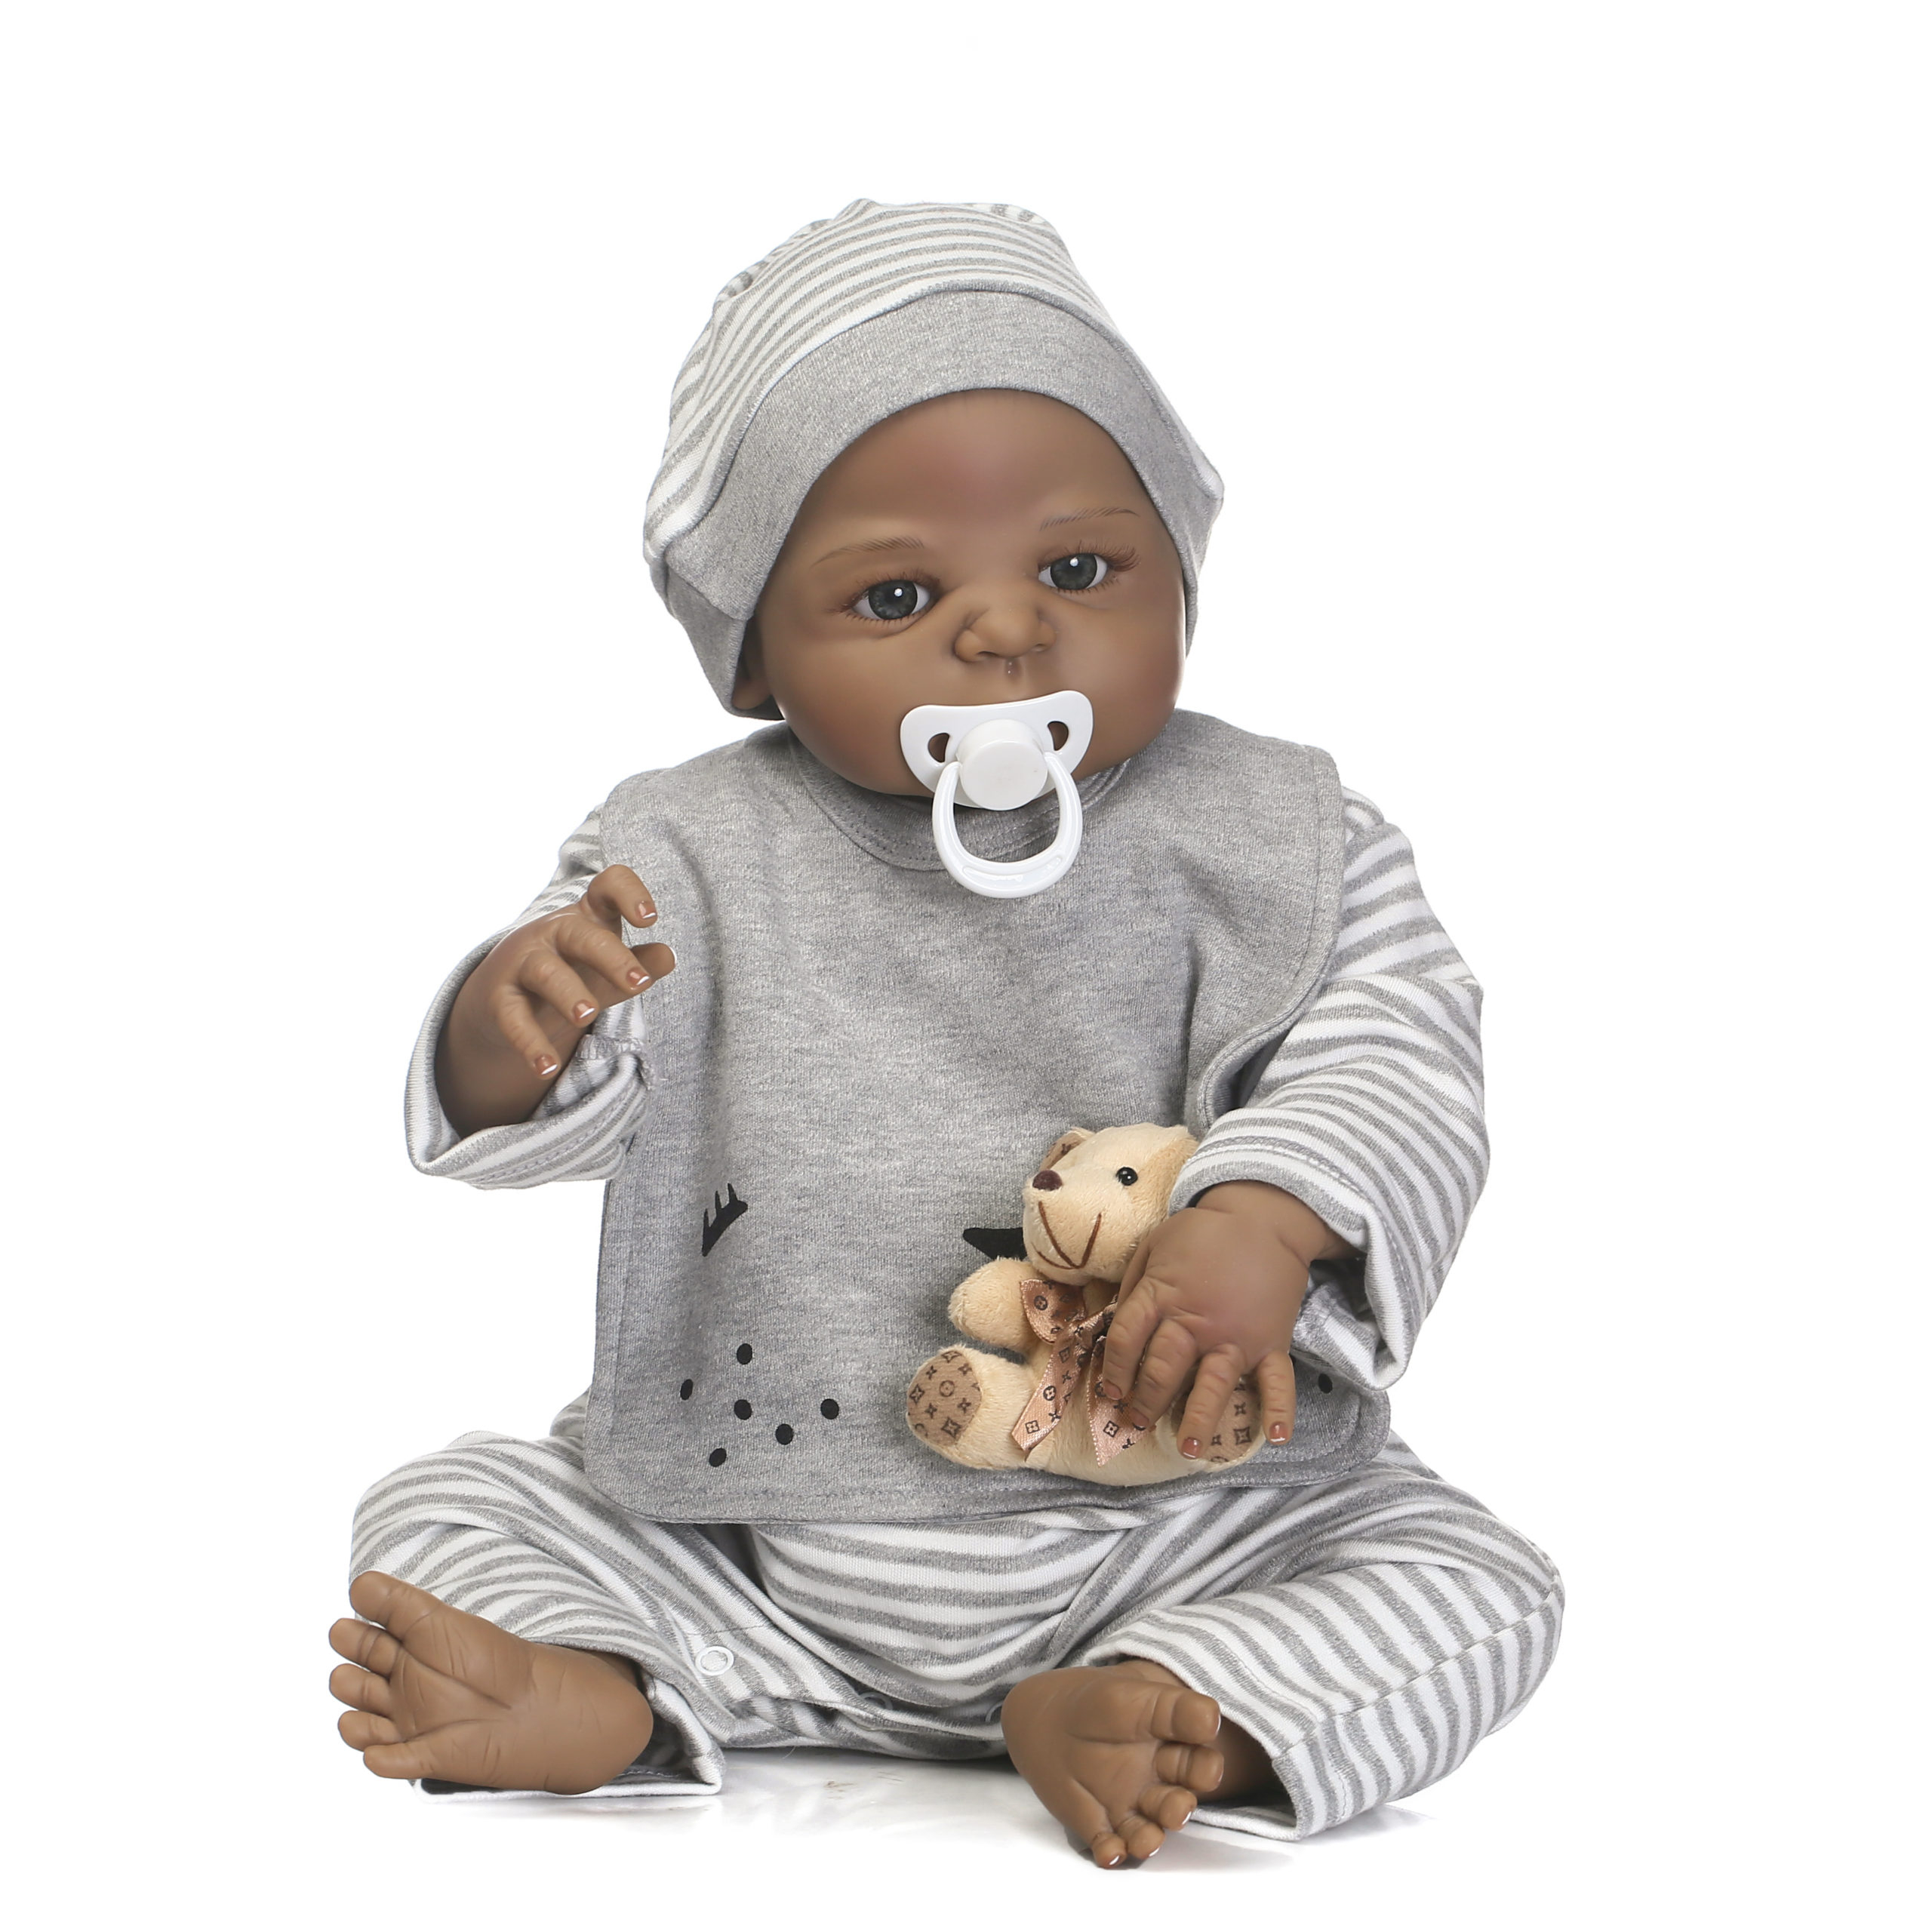 Full Silicone Reborn Baby Dolls with Lifelike African American